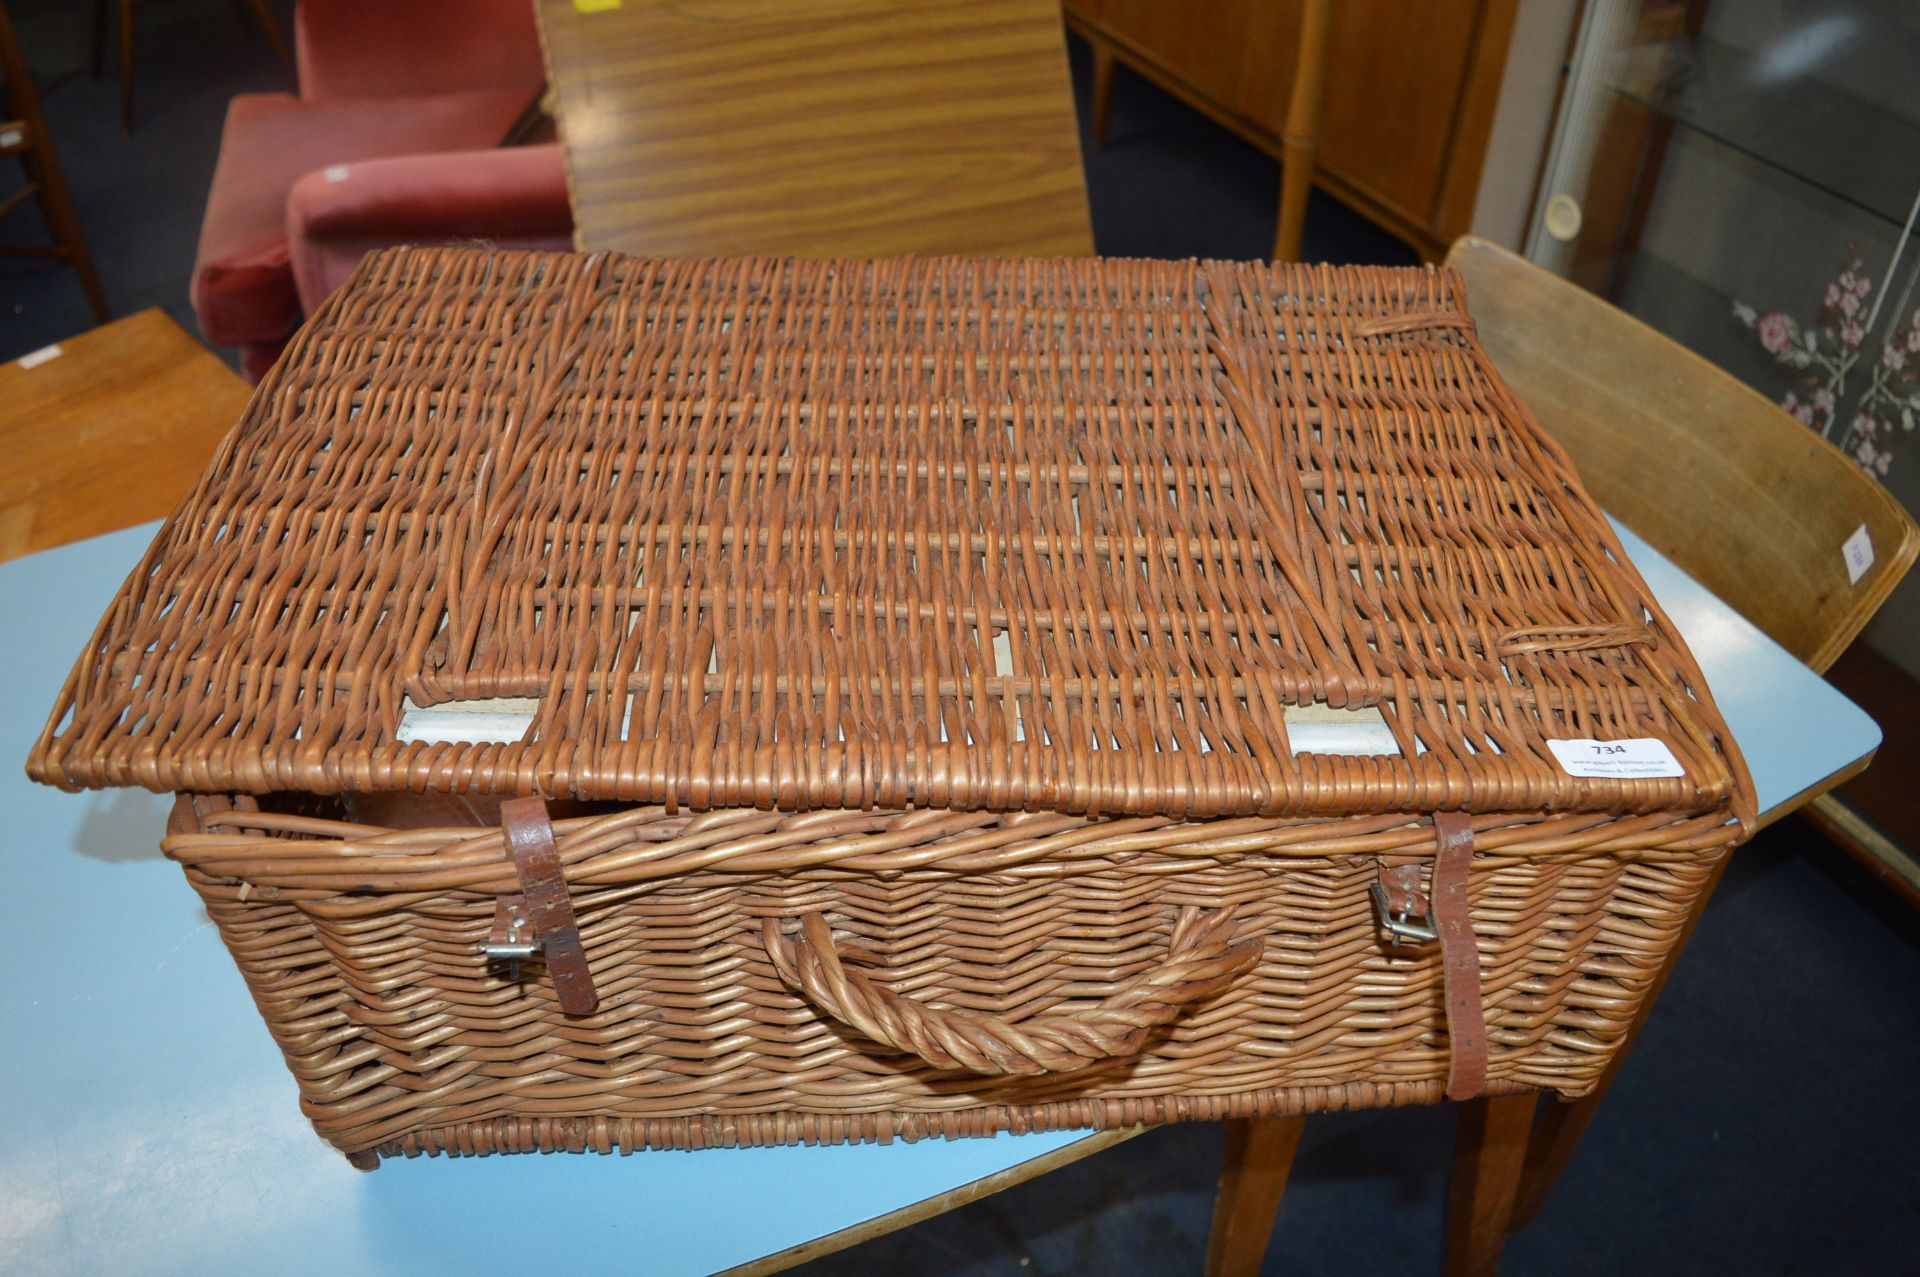 Picnic Hamper and Contents - Image 2 of 2